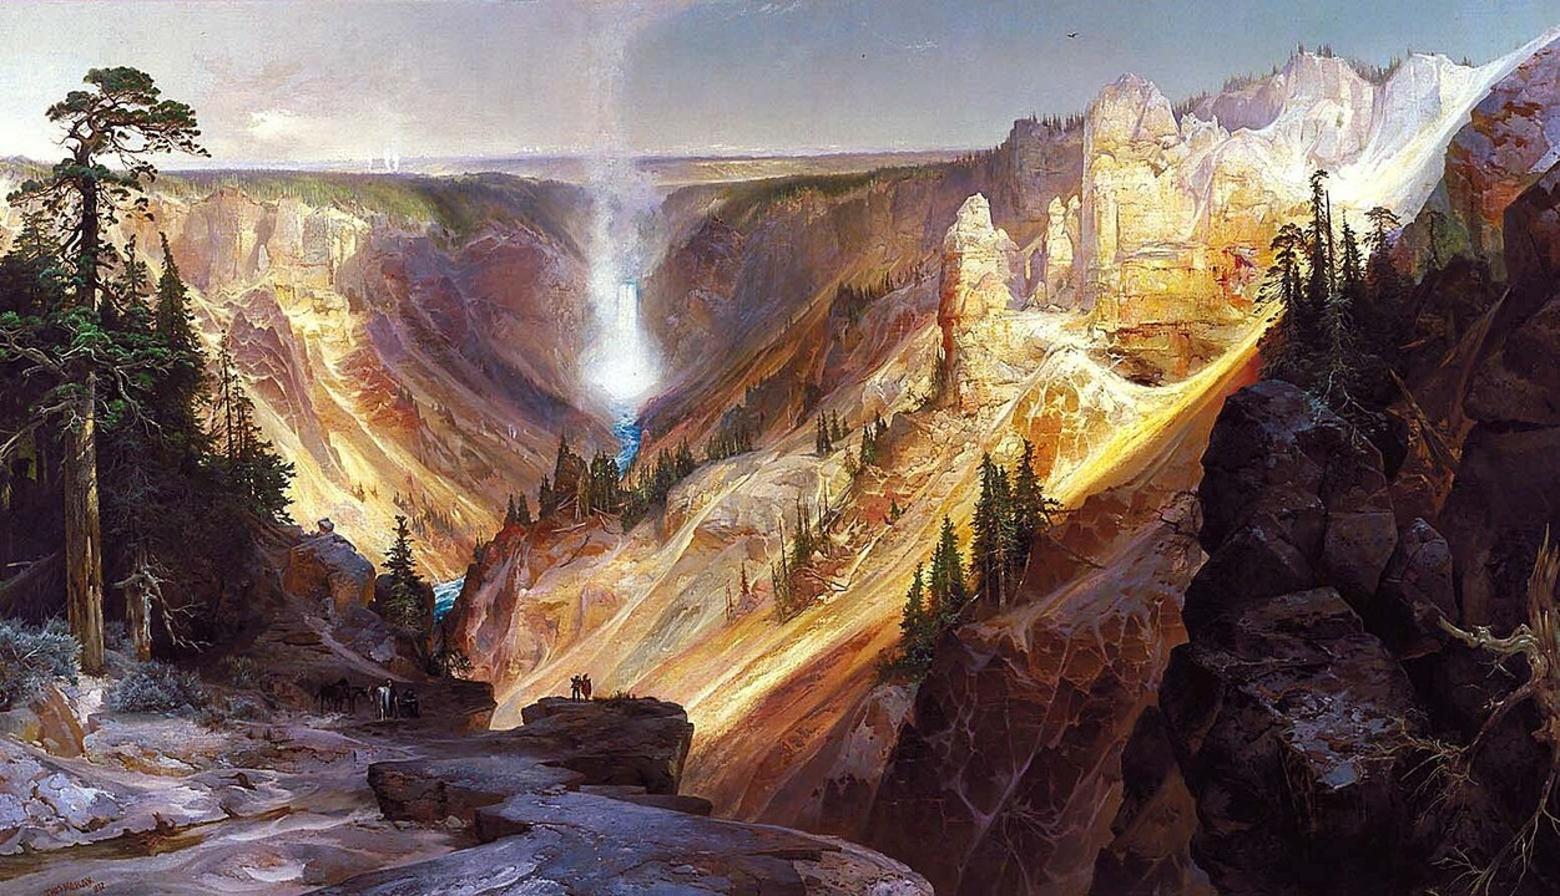 English-American artist Thomas Moran painted this famous piece, "The Grand Canyon of the Yellowstone," in 1872. It is largely credited with expanding conservation efforts in America and hangs in the Smithsonian American Art Museum. Gift of George D. Pratt. Public Domain